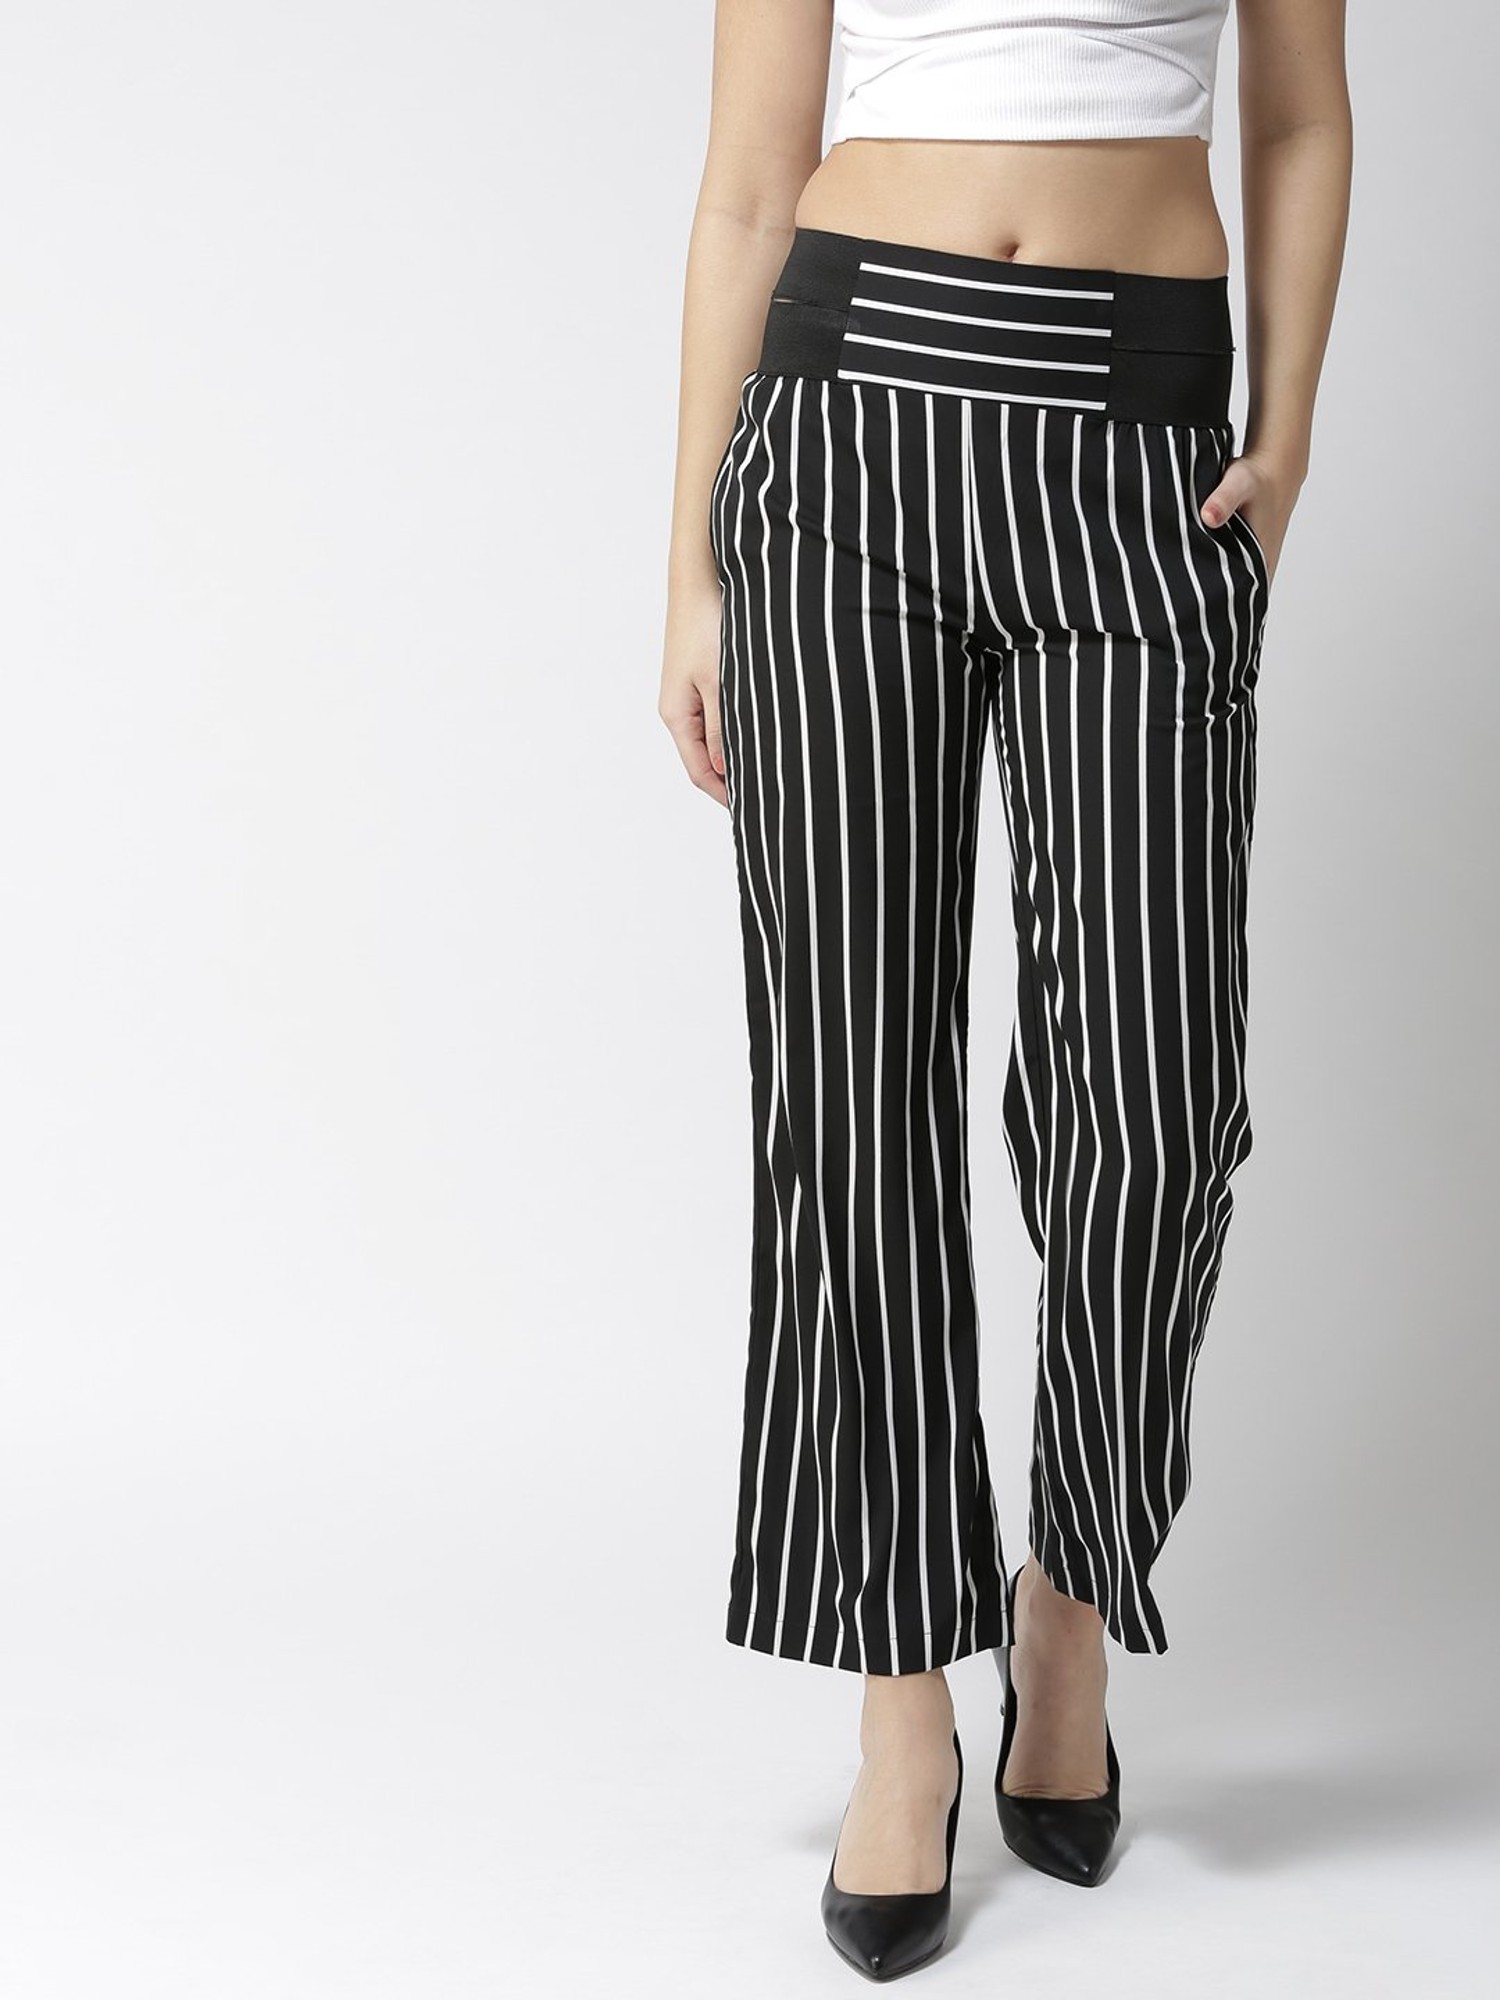 Black and White Regular Fit Casual Cotton Trouser Pants for Womens and Girls